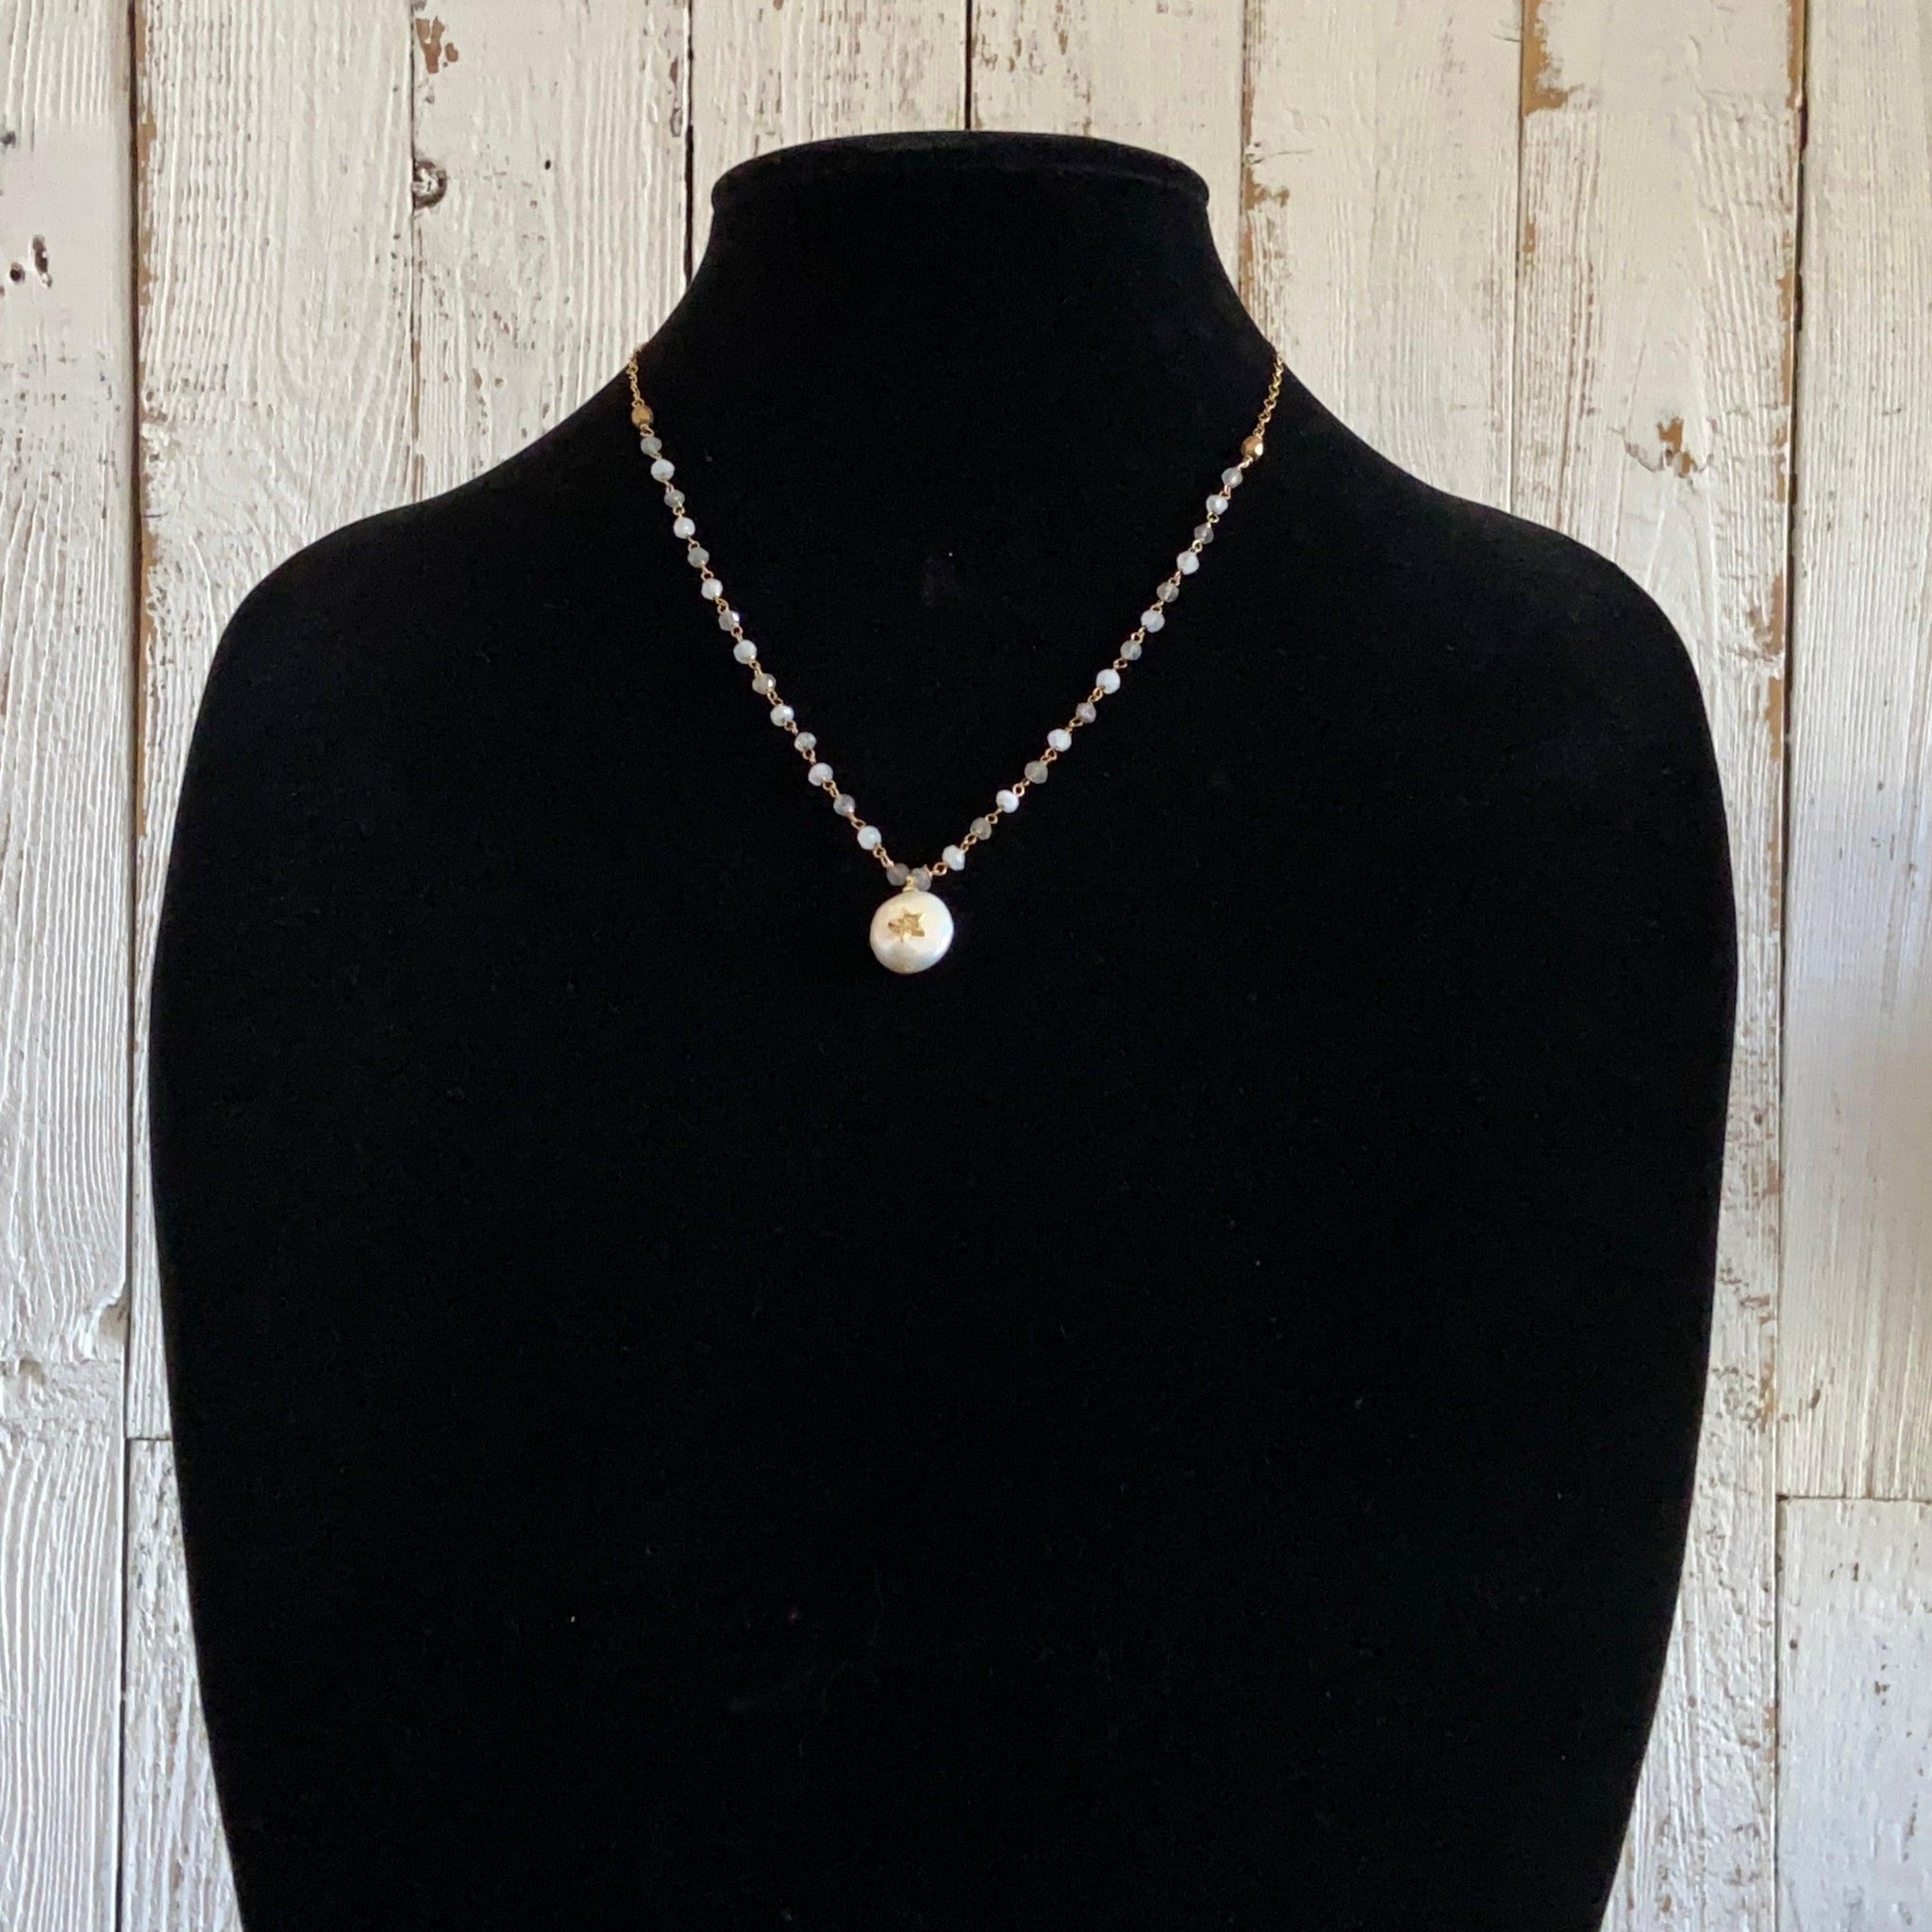 Pearl, Moonstone and Labradorite with 14K Gold Filled Necklace Uni-T Necklace